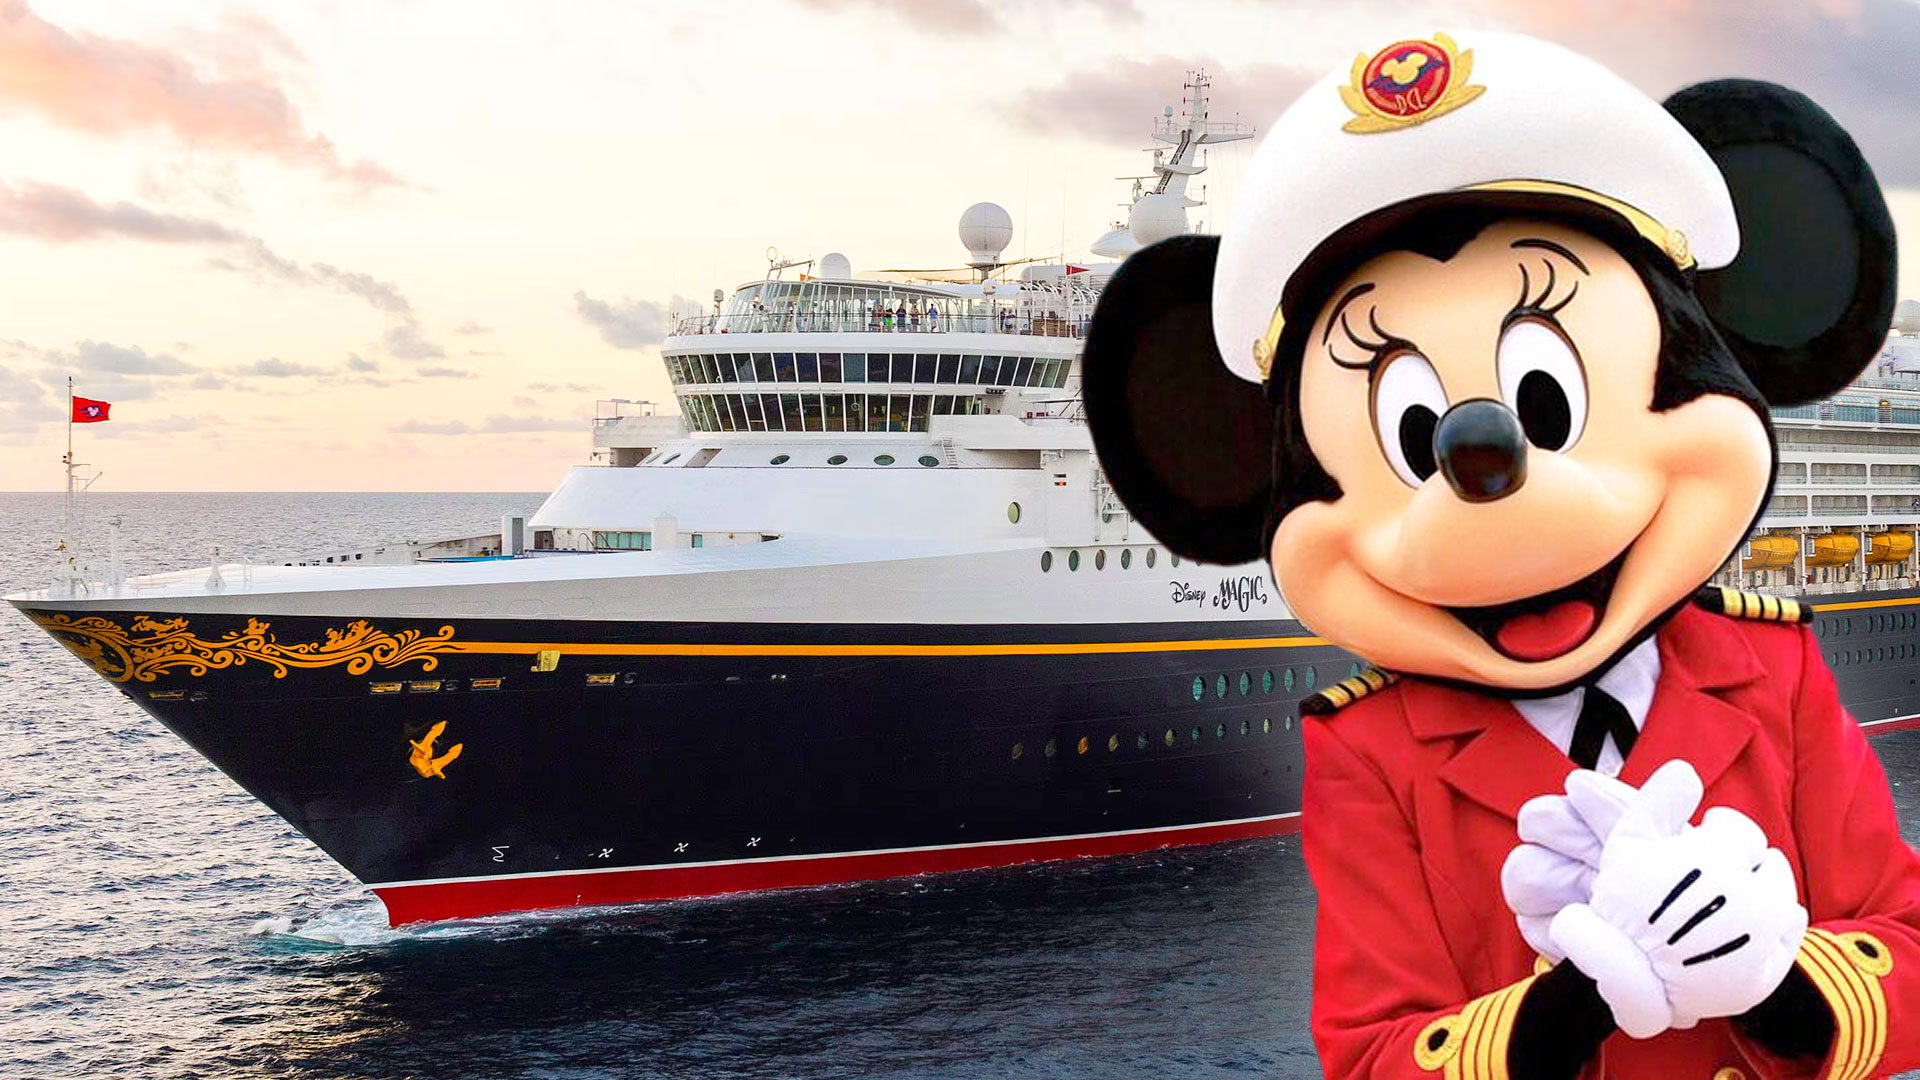 Disney Cruise Line Deal: Save Up to 25% on Select Dates